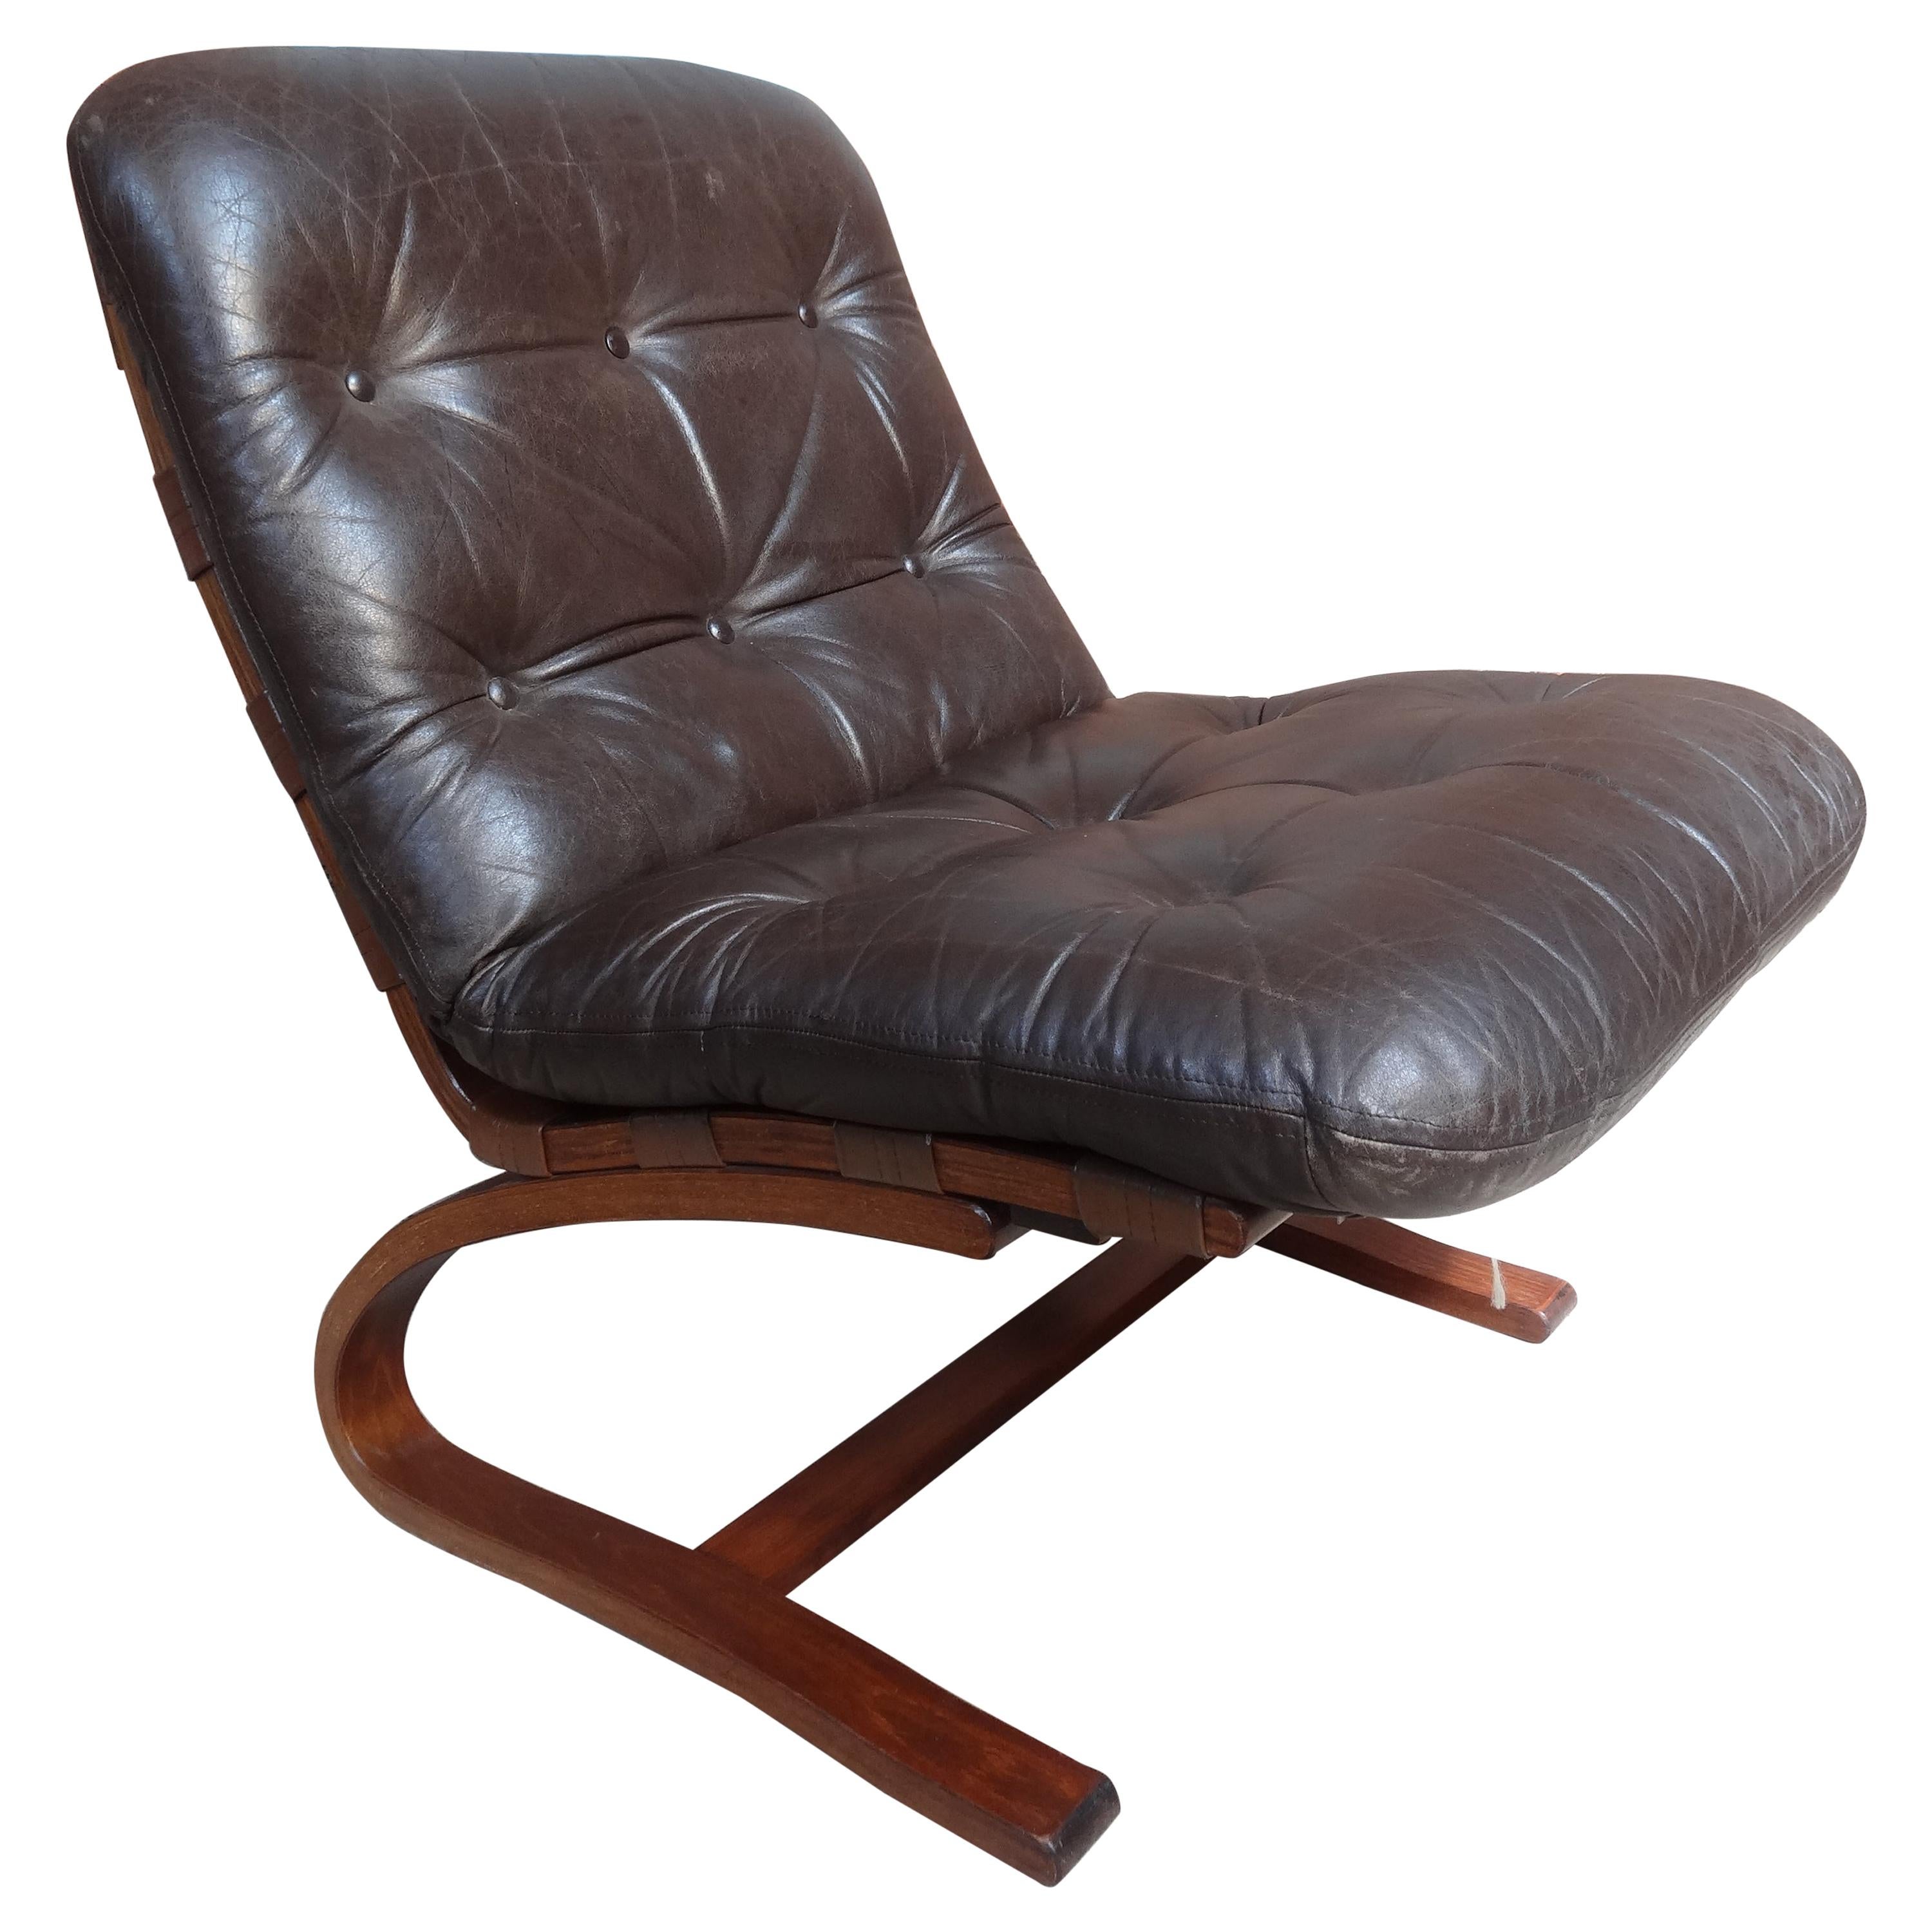 1970's Danish Ingmar Relling brown leather arm chair 